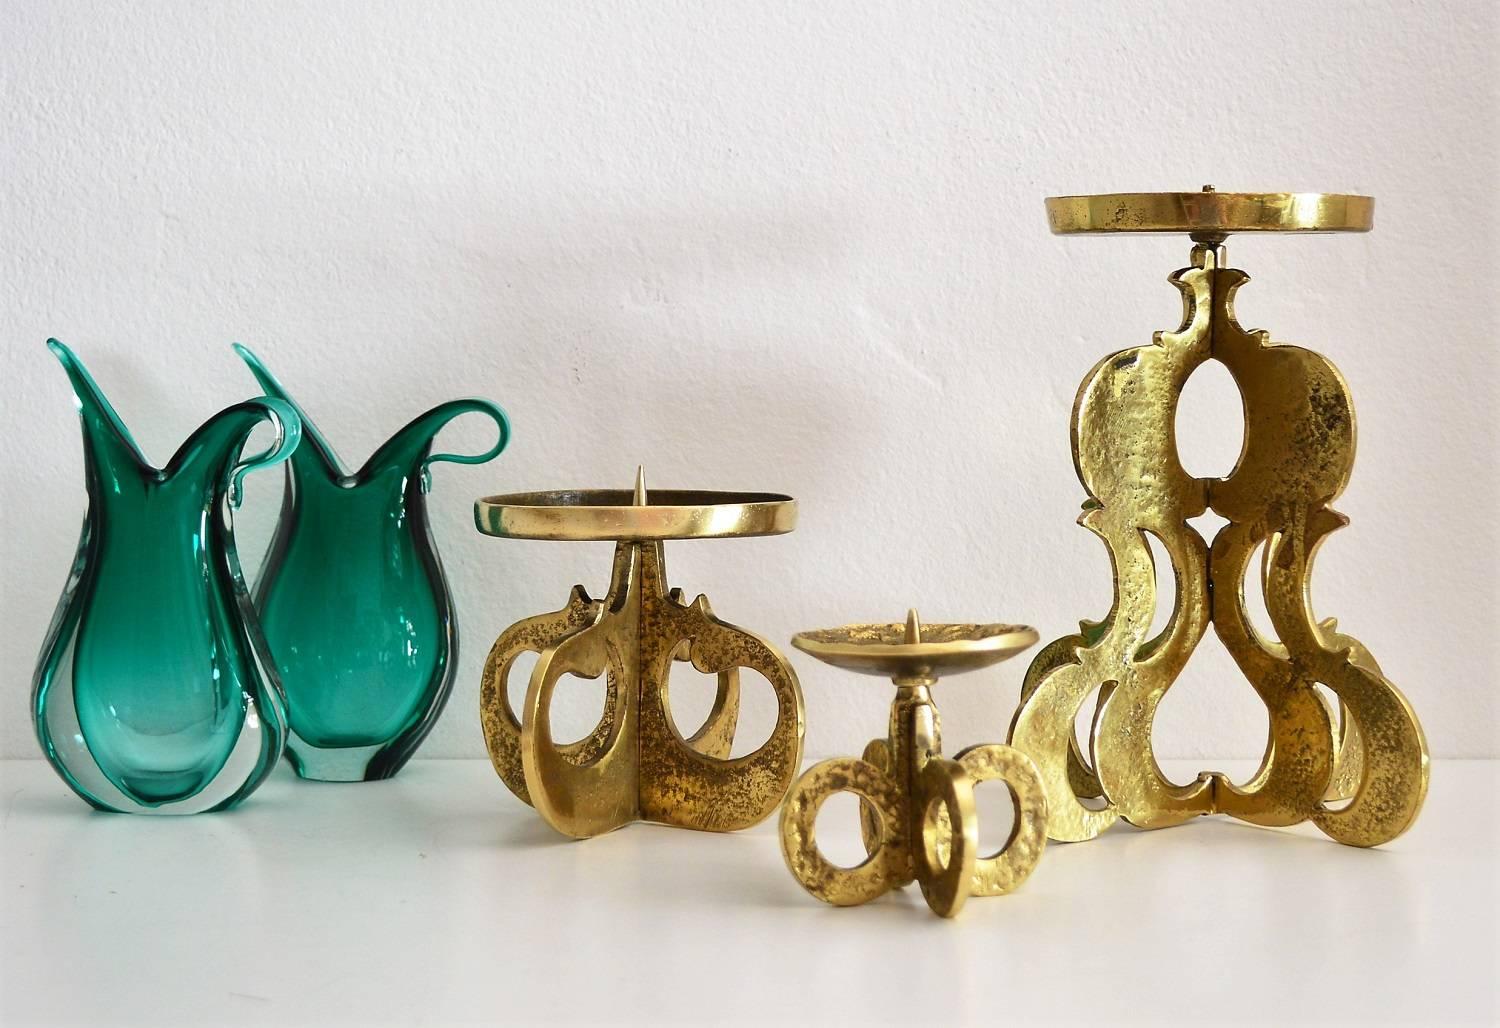 Hand-Crafted Midcentury Candlestick Holder in Brass in the Brutalist Style, Set of three